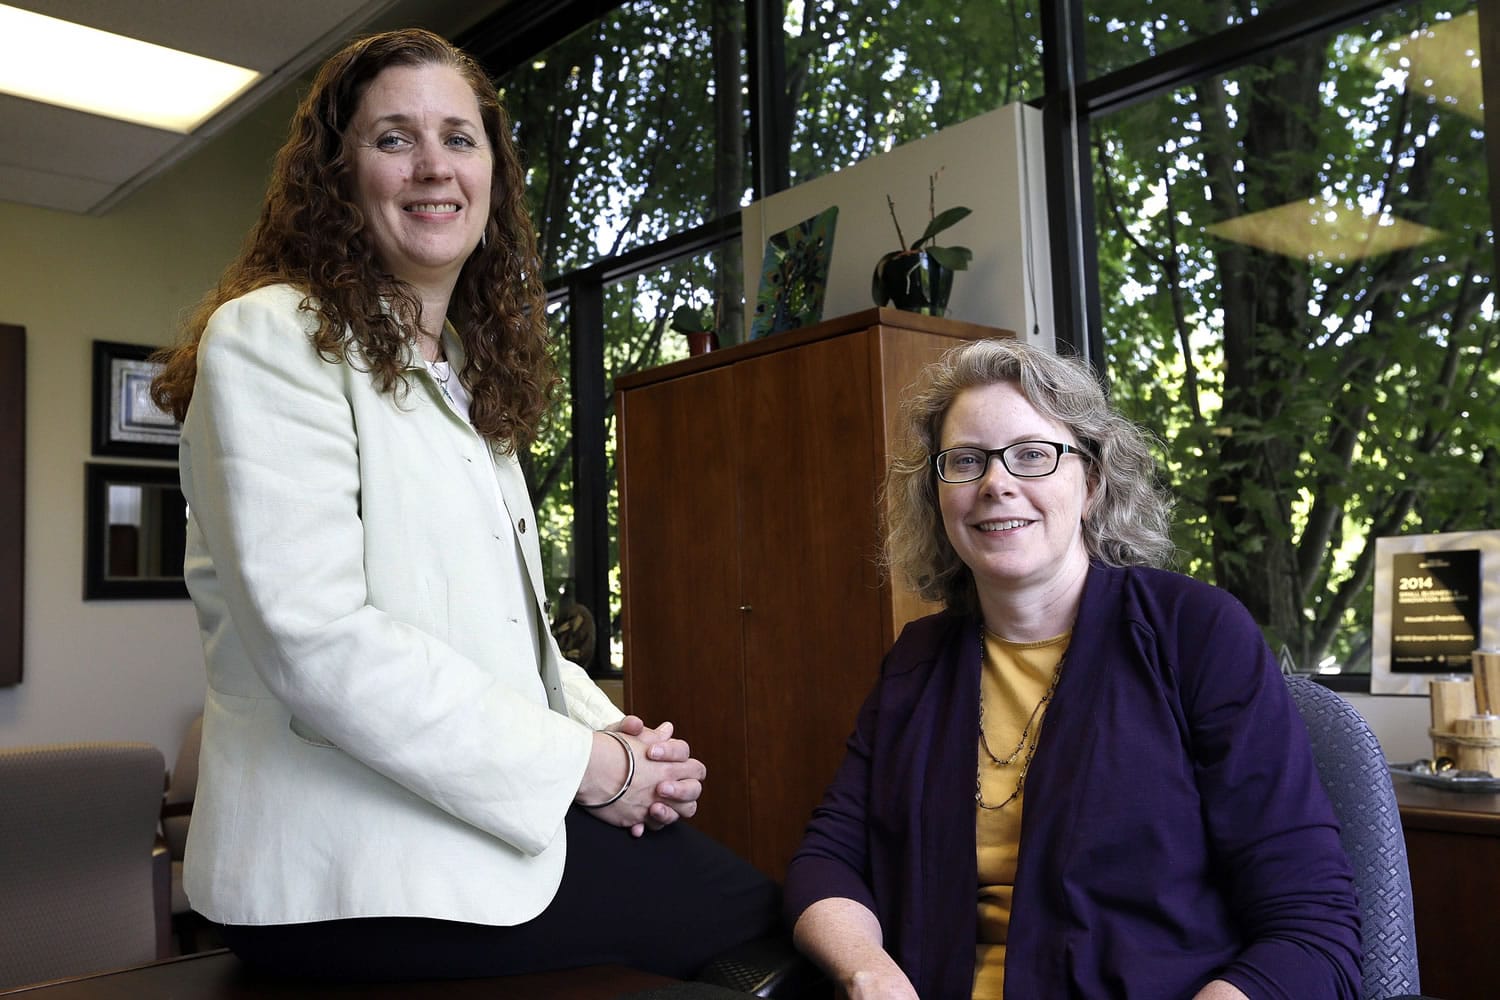 Dr. Pamela Miner, right, and nurse Mary Sayre pose for a photo at the Housecall Providers office in Portland.